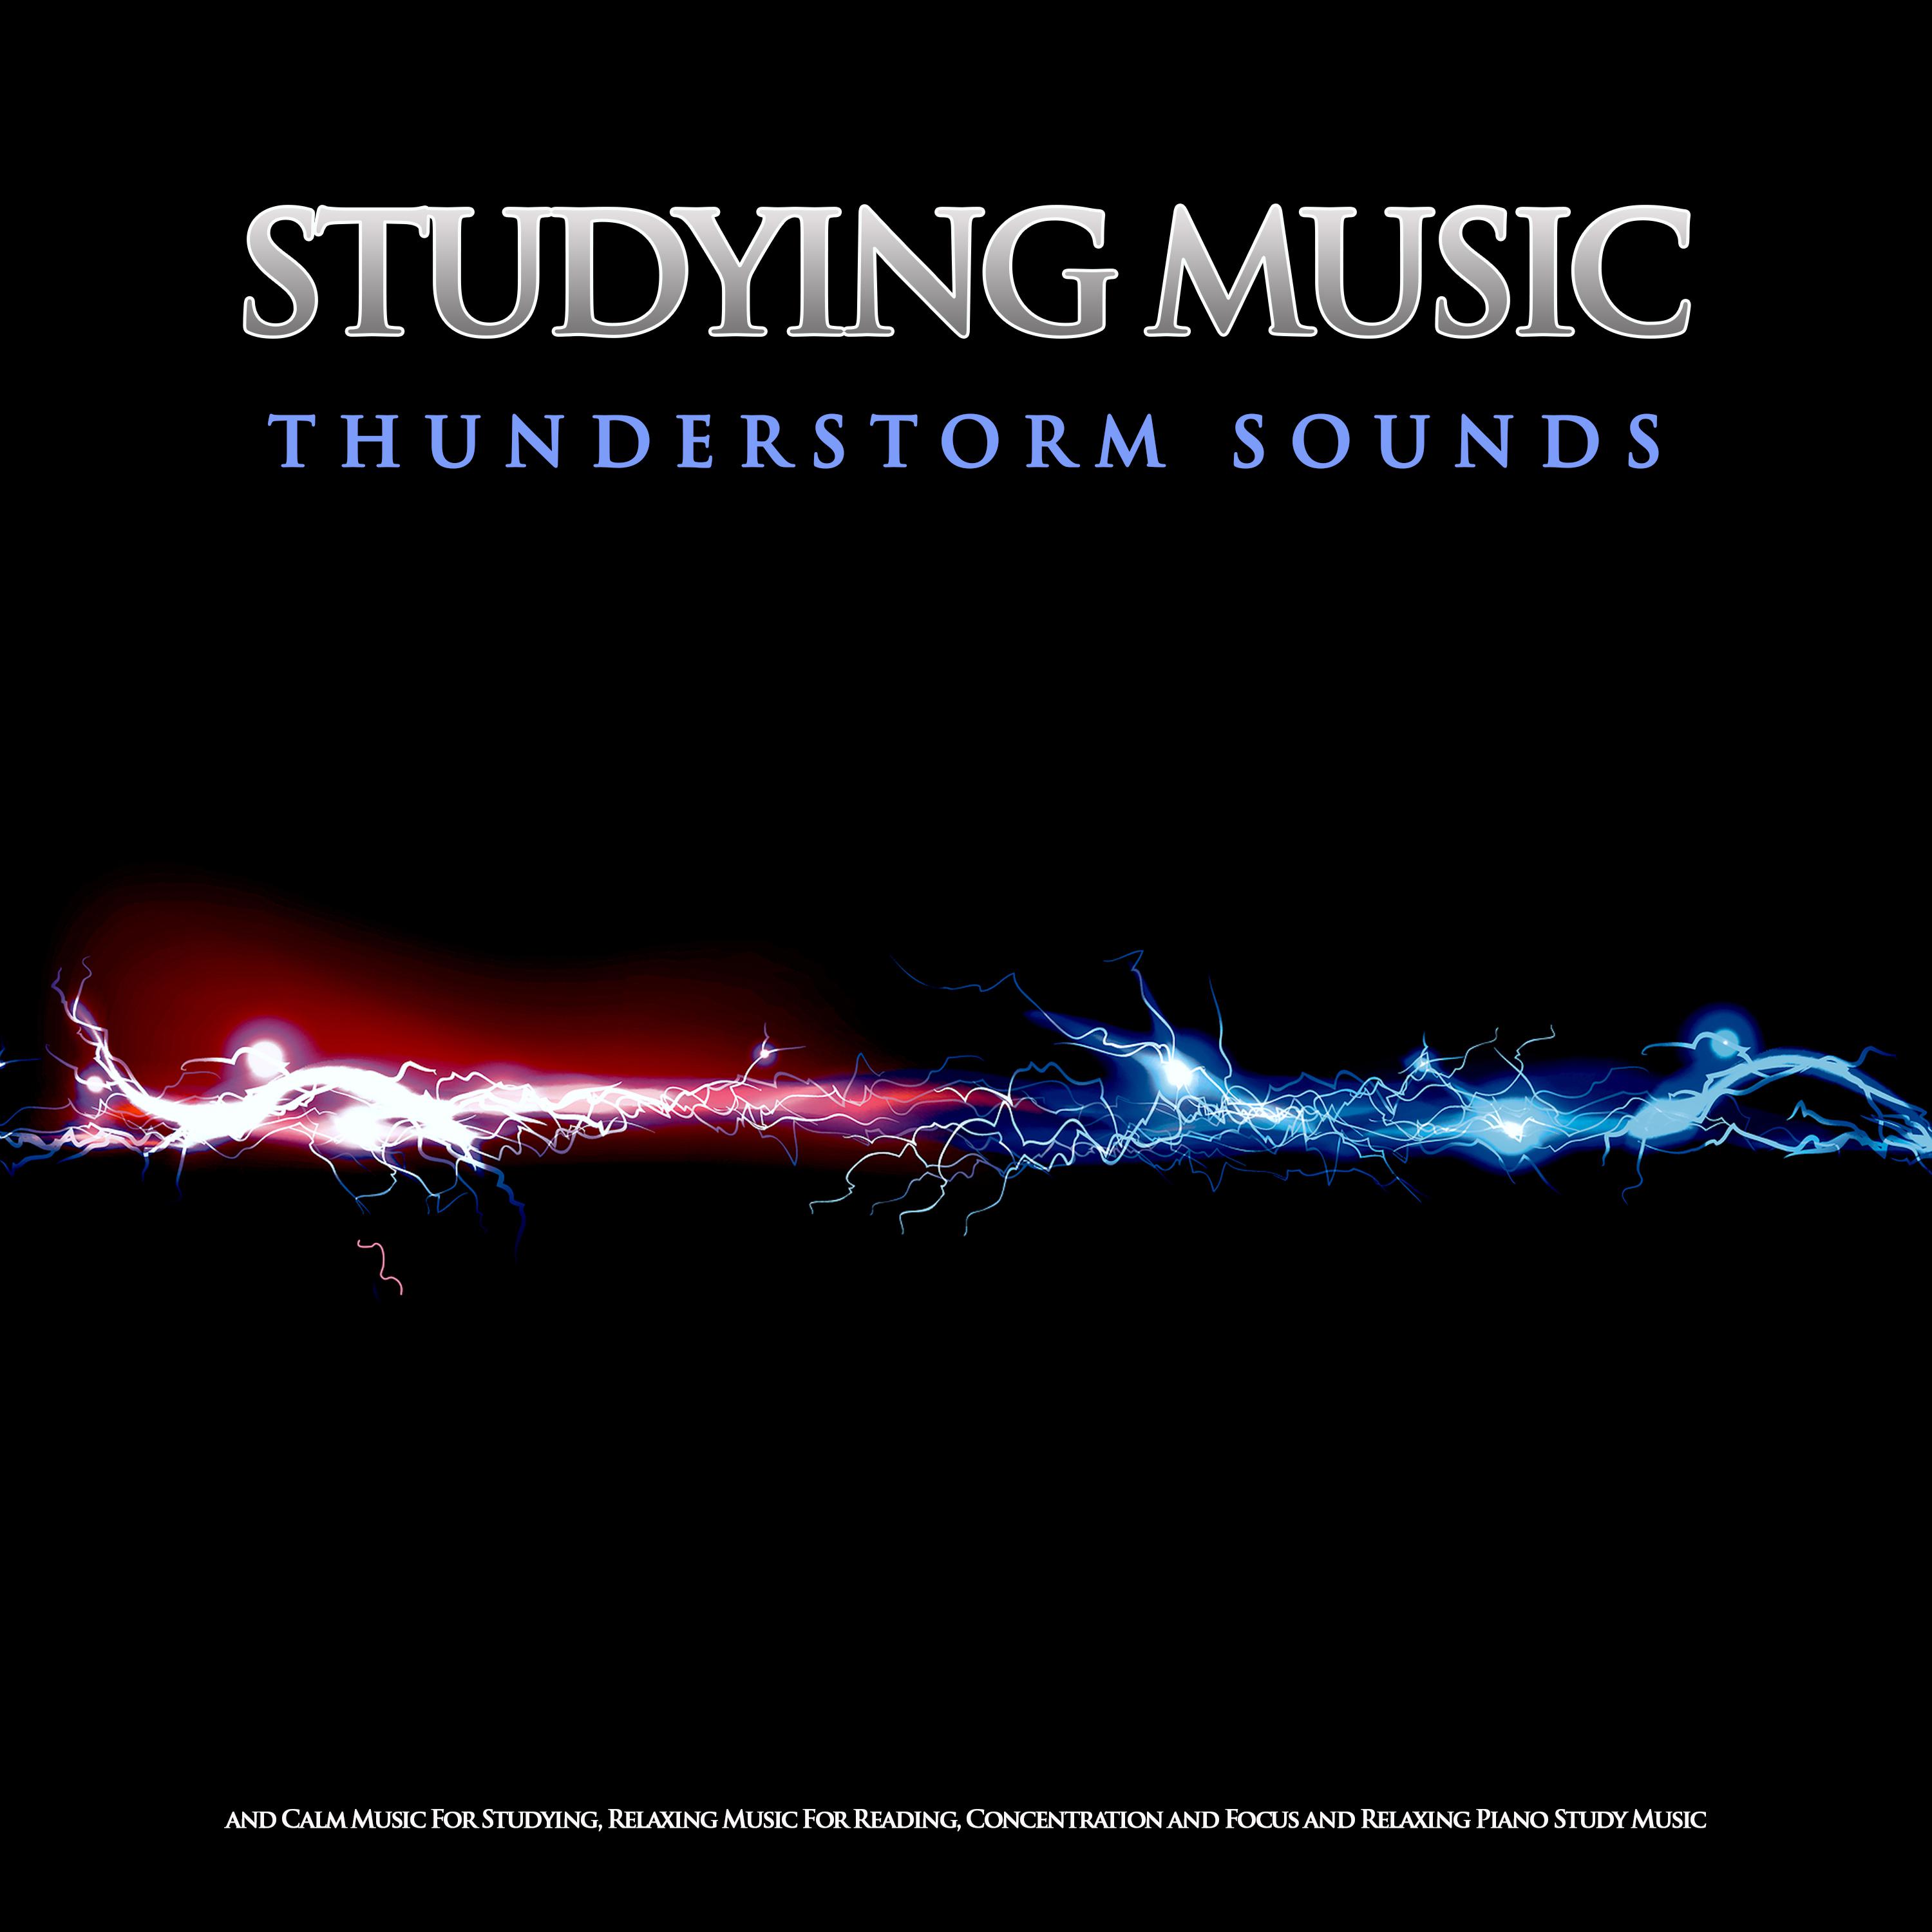 Music For Concentration With Thunderstorm Sounds